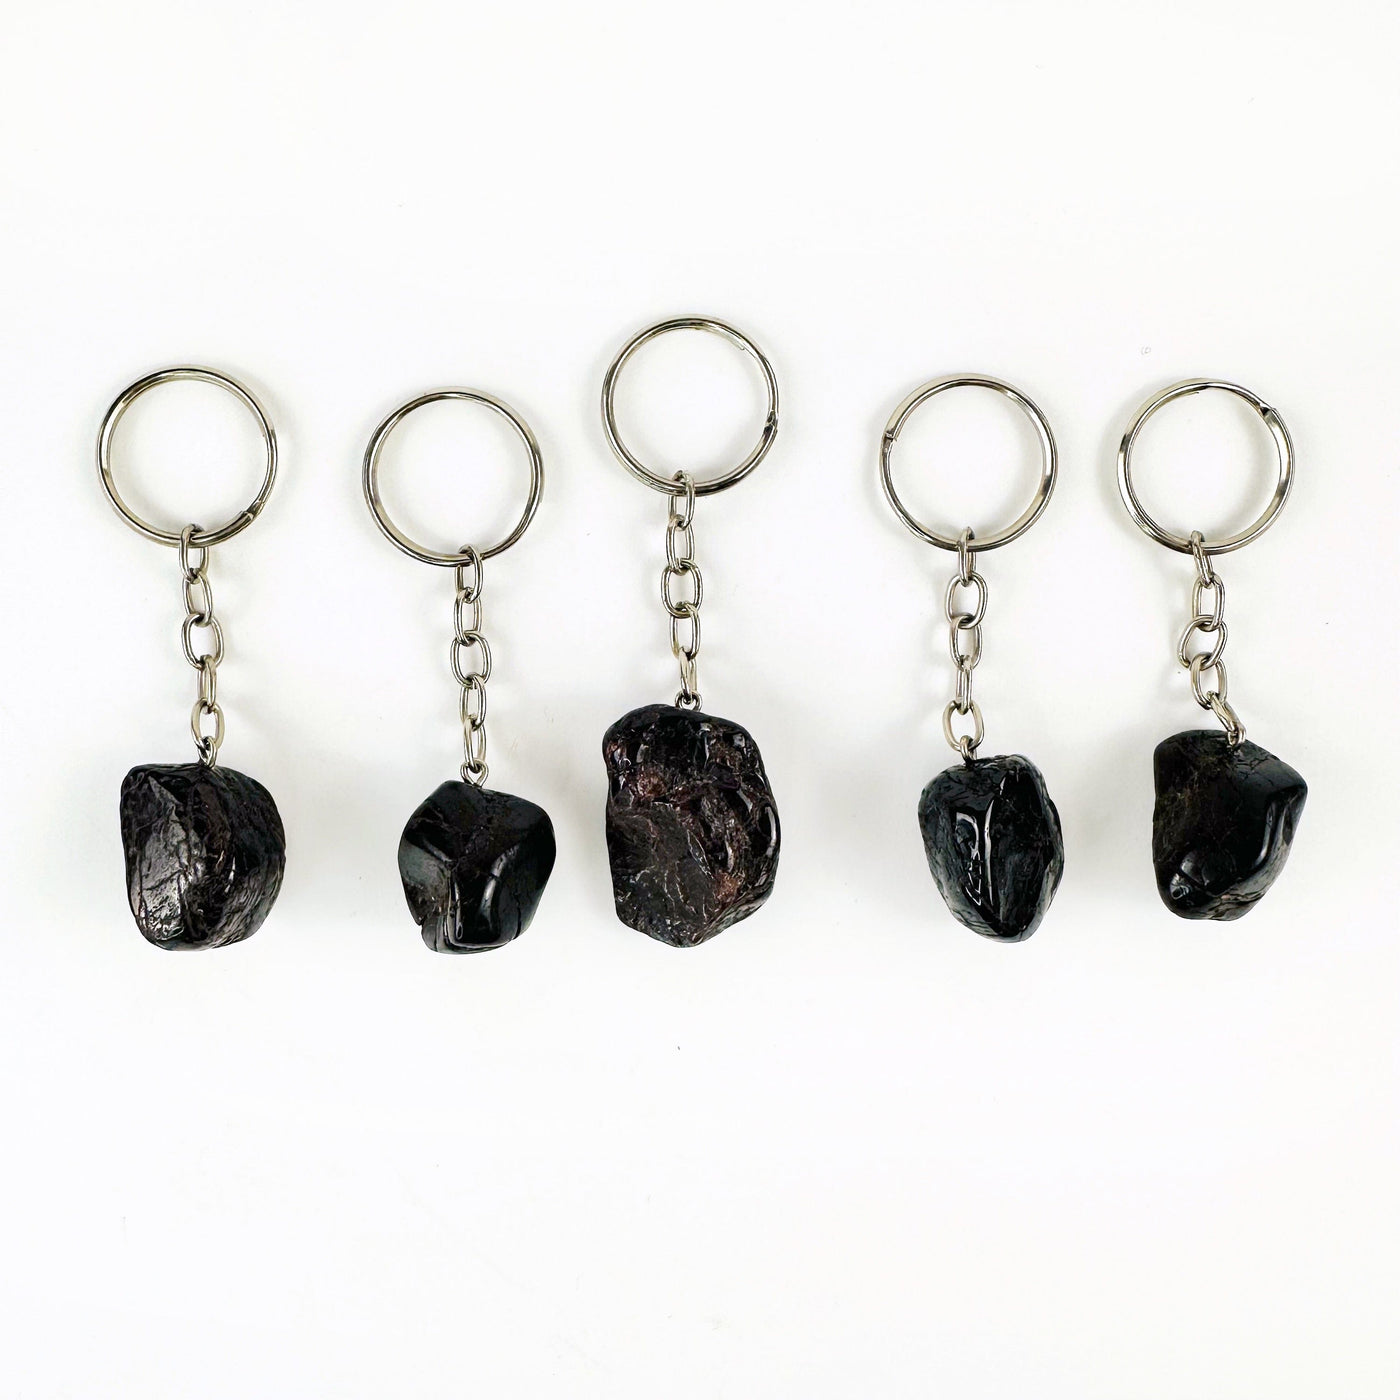 Tumbled Garnet Keychains, 5 in a row to show variation of stone size and shape